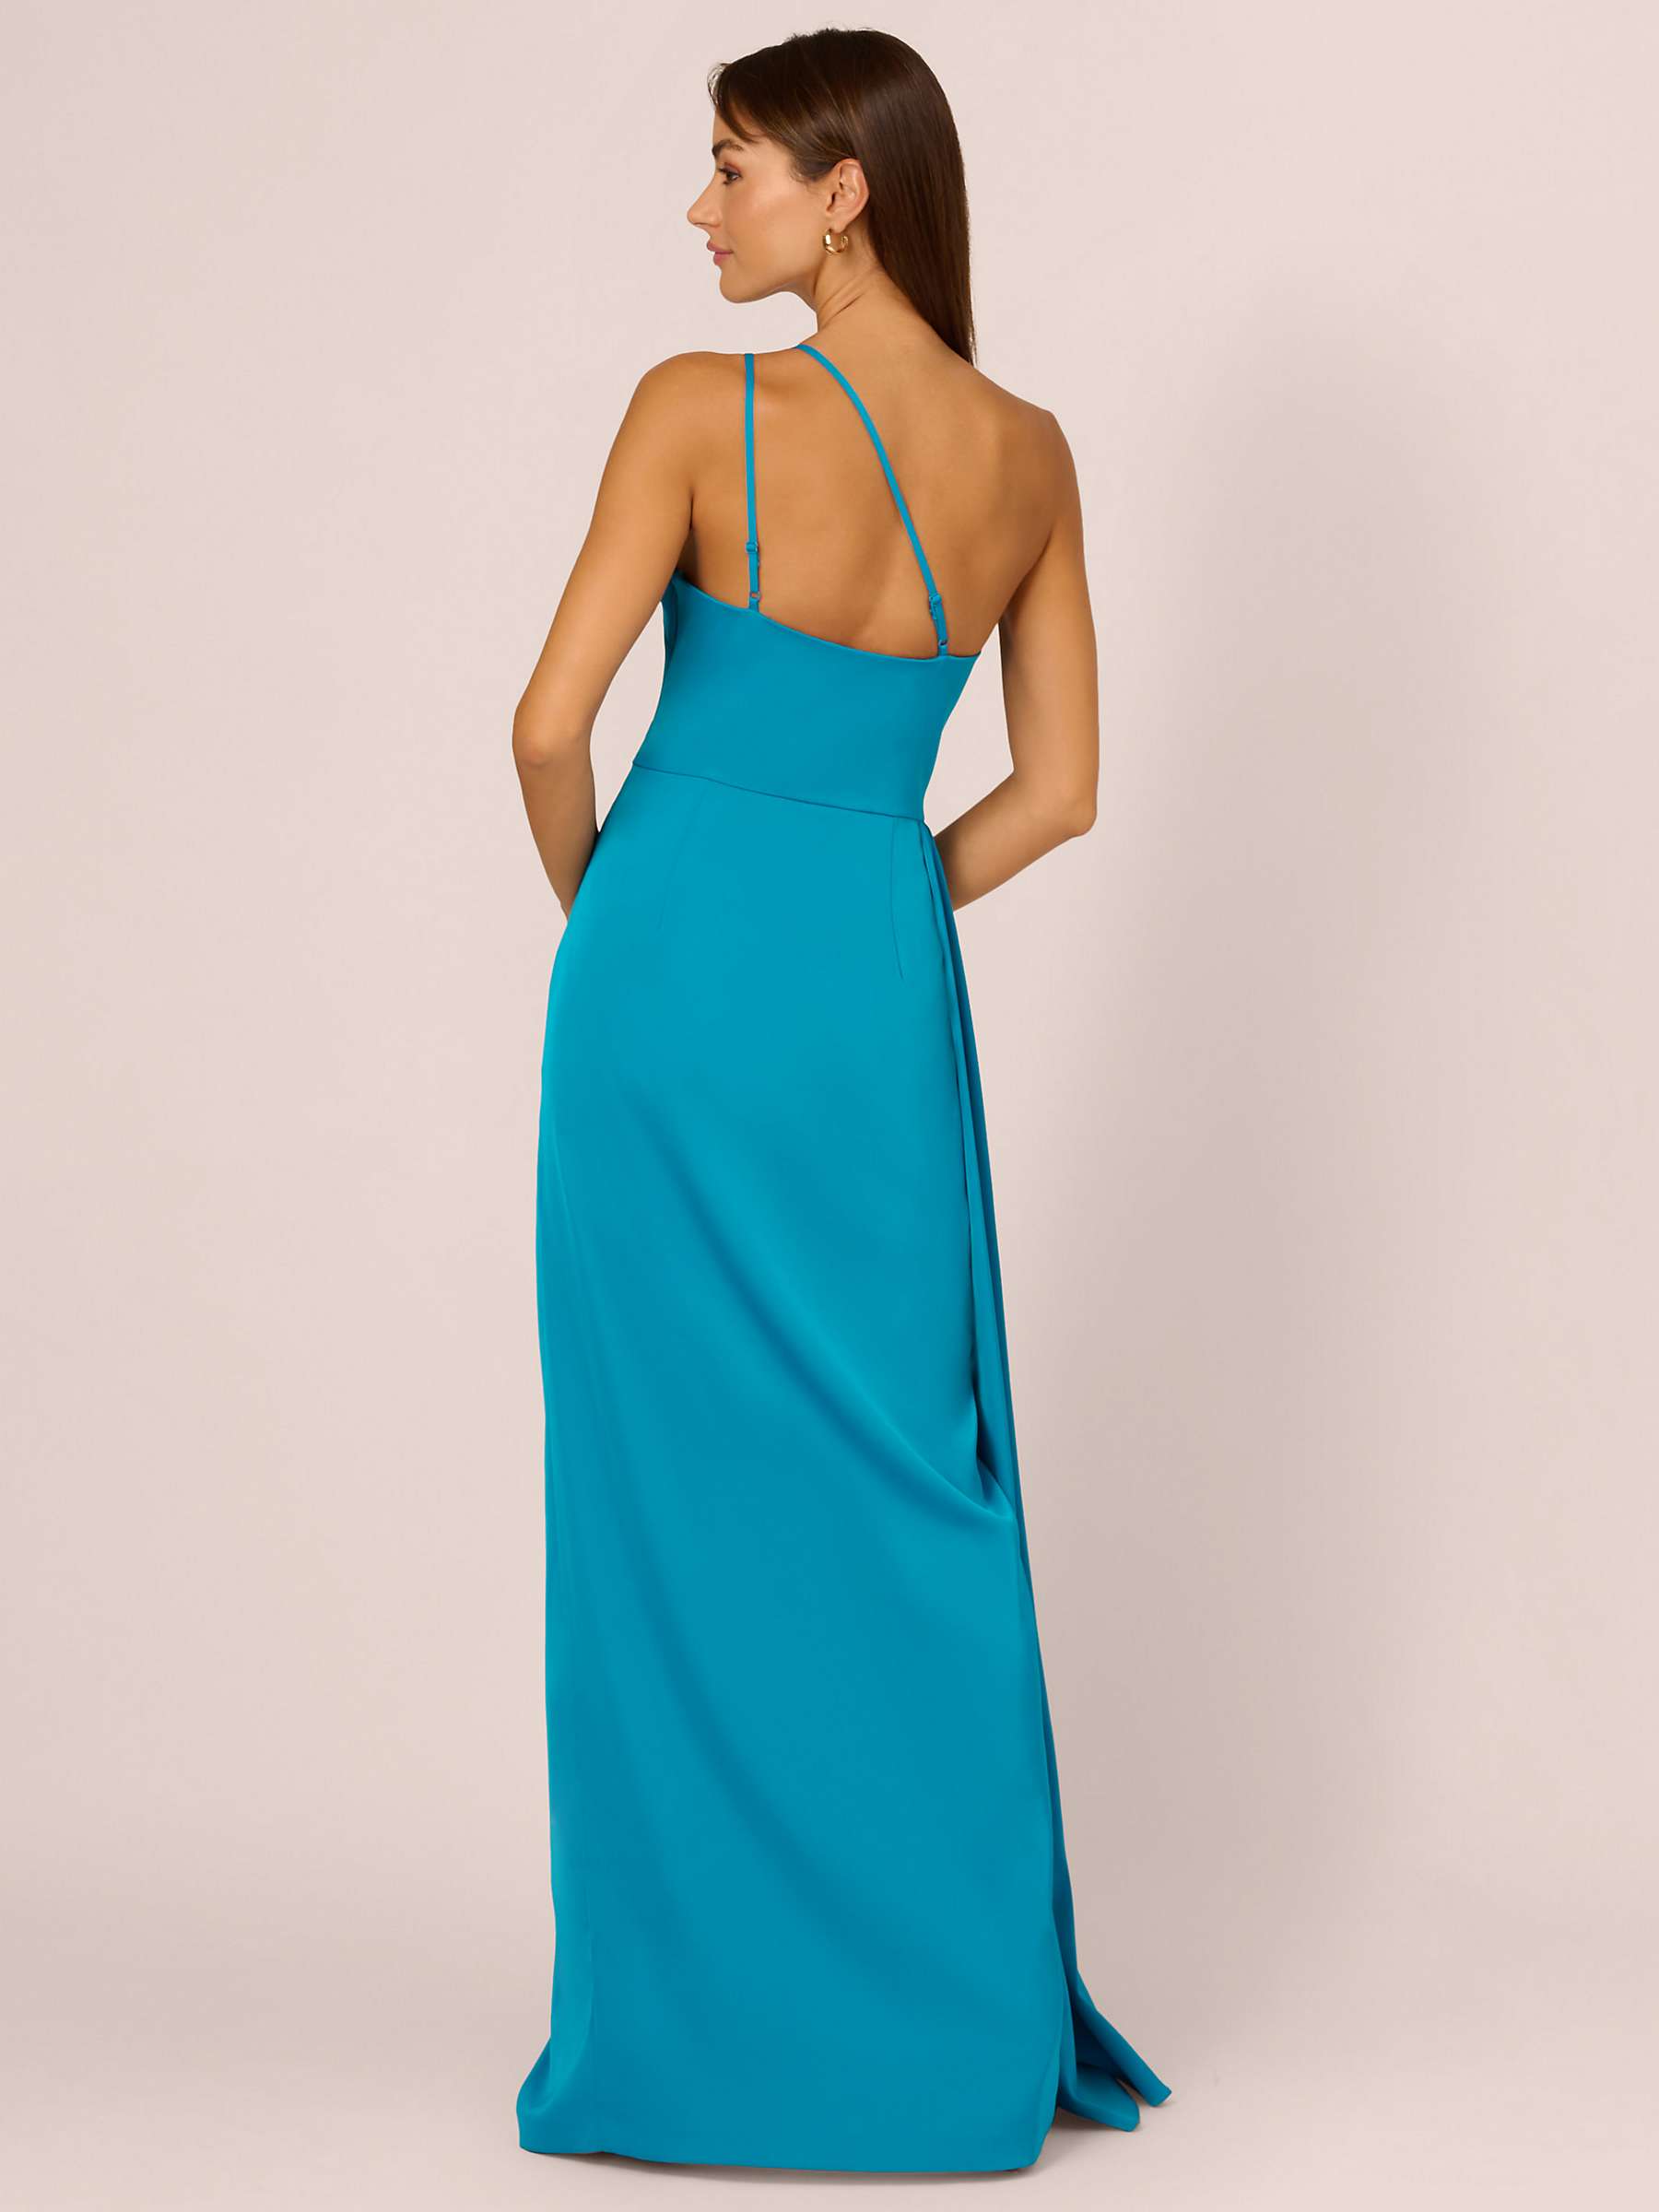 Buy Adrianna by Adrianna Papell One Shoulder Stretch Satin Maxi Dress, Dazzling Ocean Online at johnlewis.com